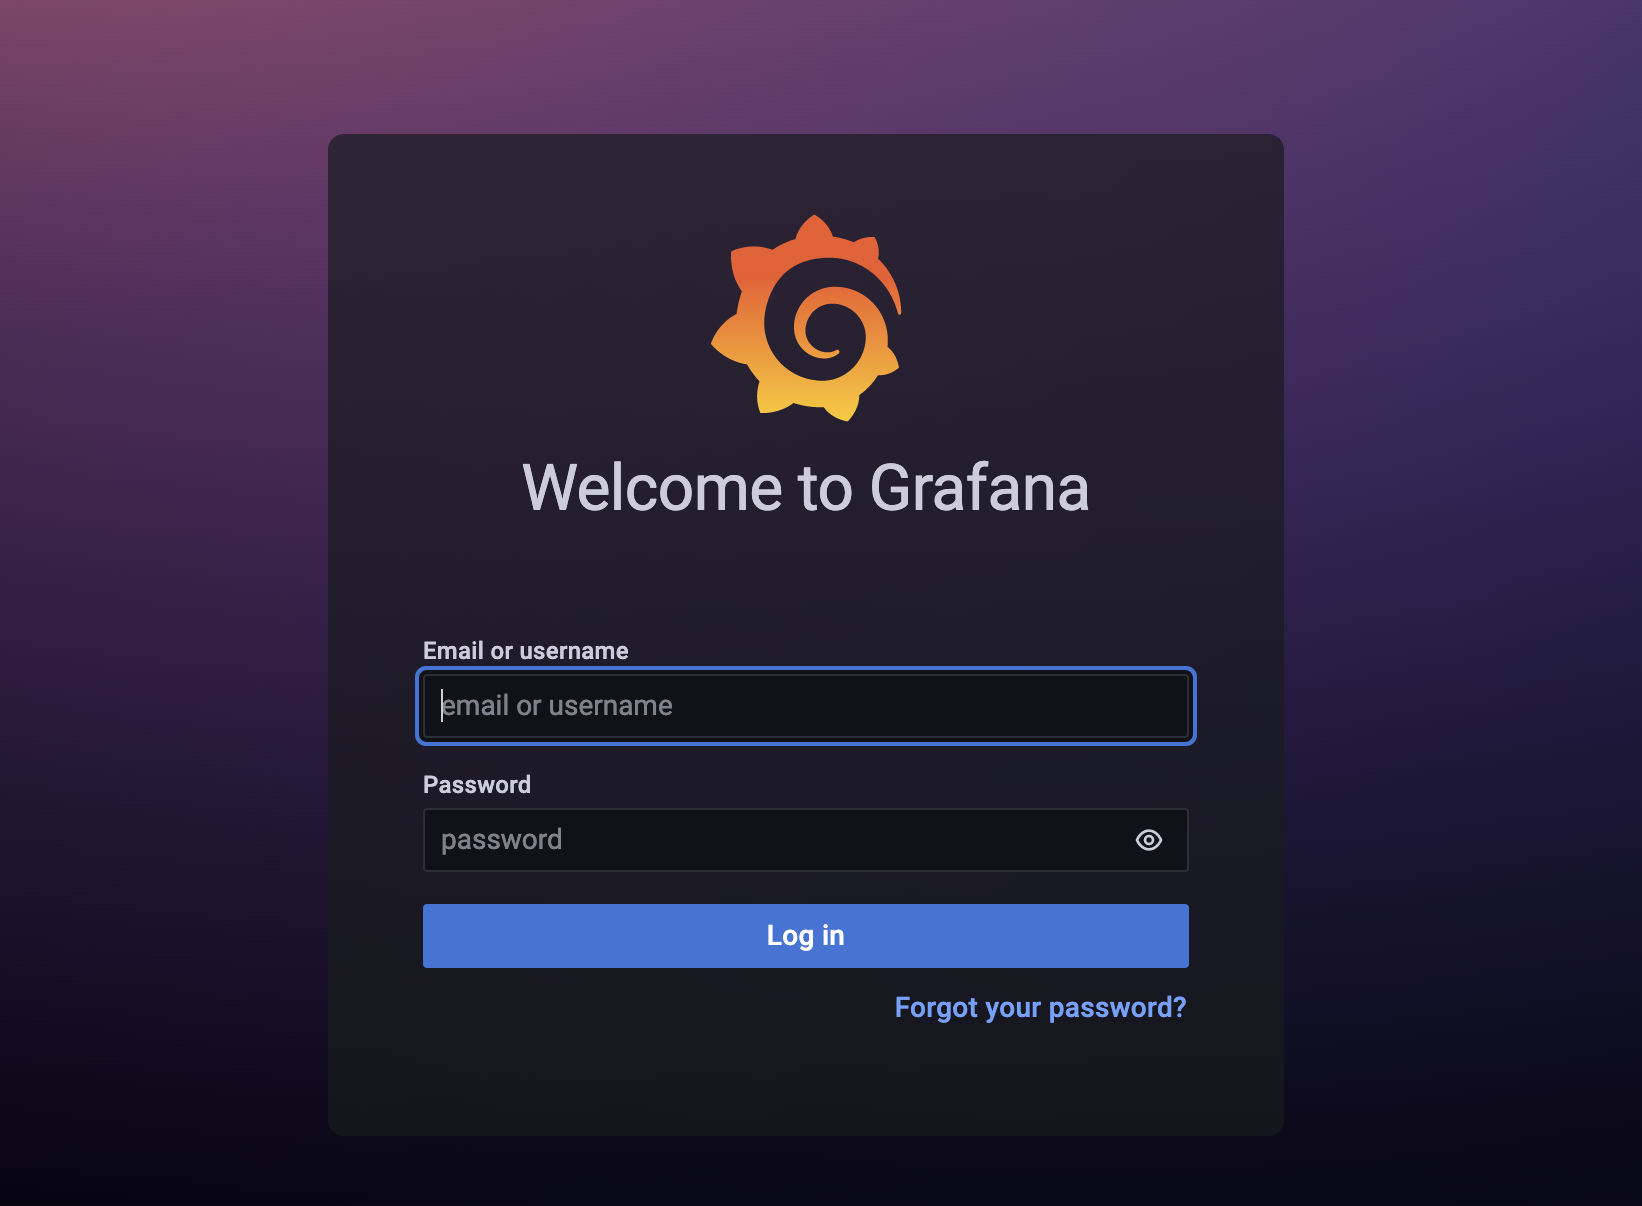 Grafana login page showing prompts for email or username as well as password